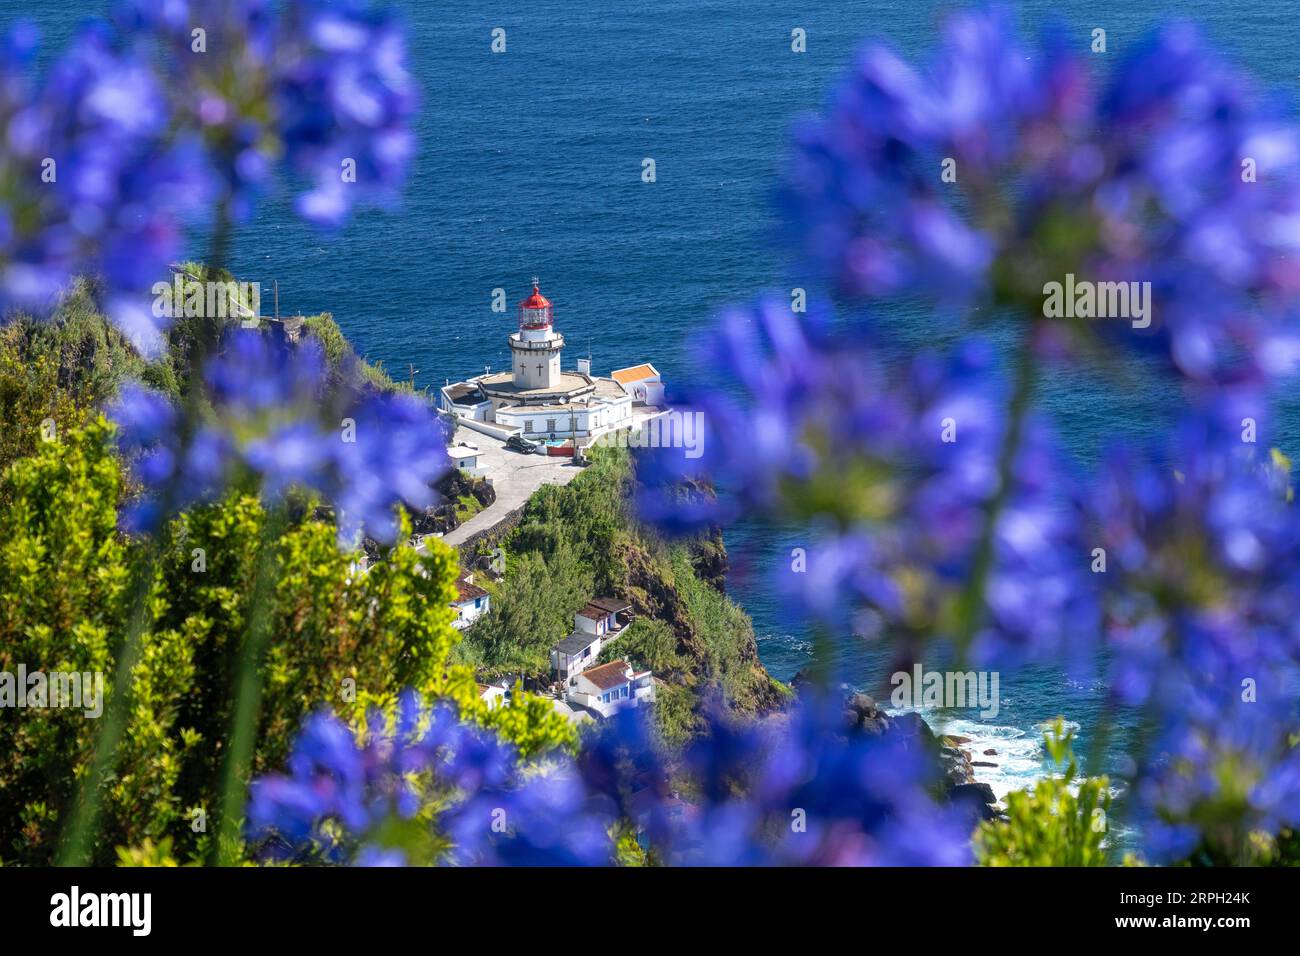 View of the Farol Ponta do Arnel lighthouse clinging to the cliffs edge framed by blooming purple Agapanthus flowers in Nordeste, Sao Miguel Island, Azores, Portugal. Stock Photo